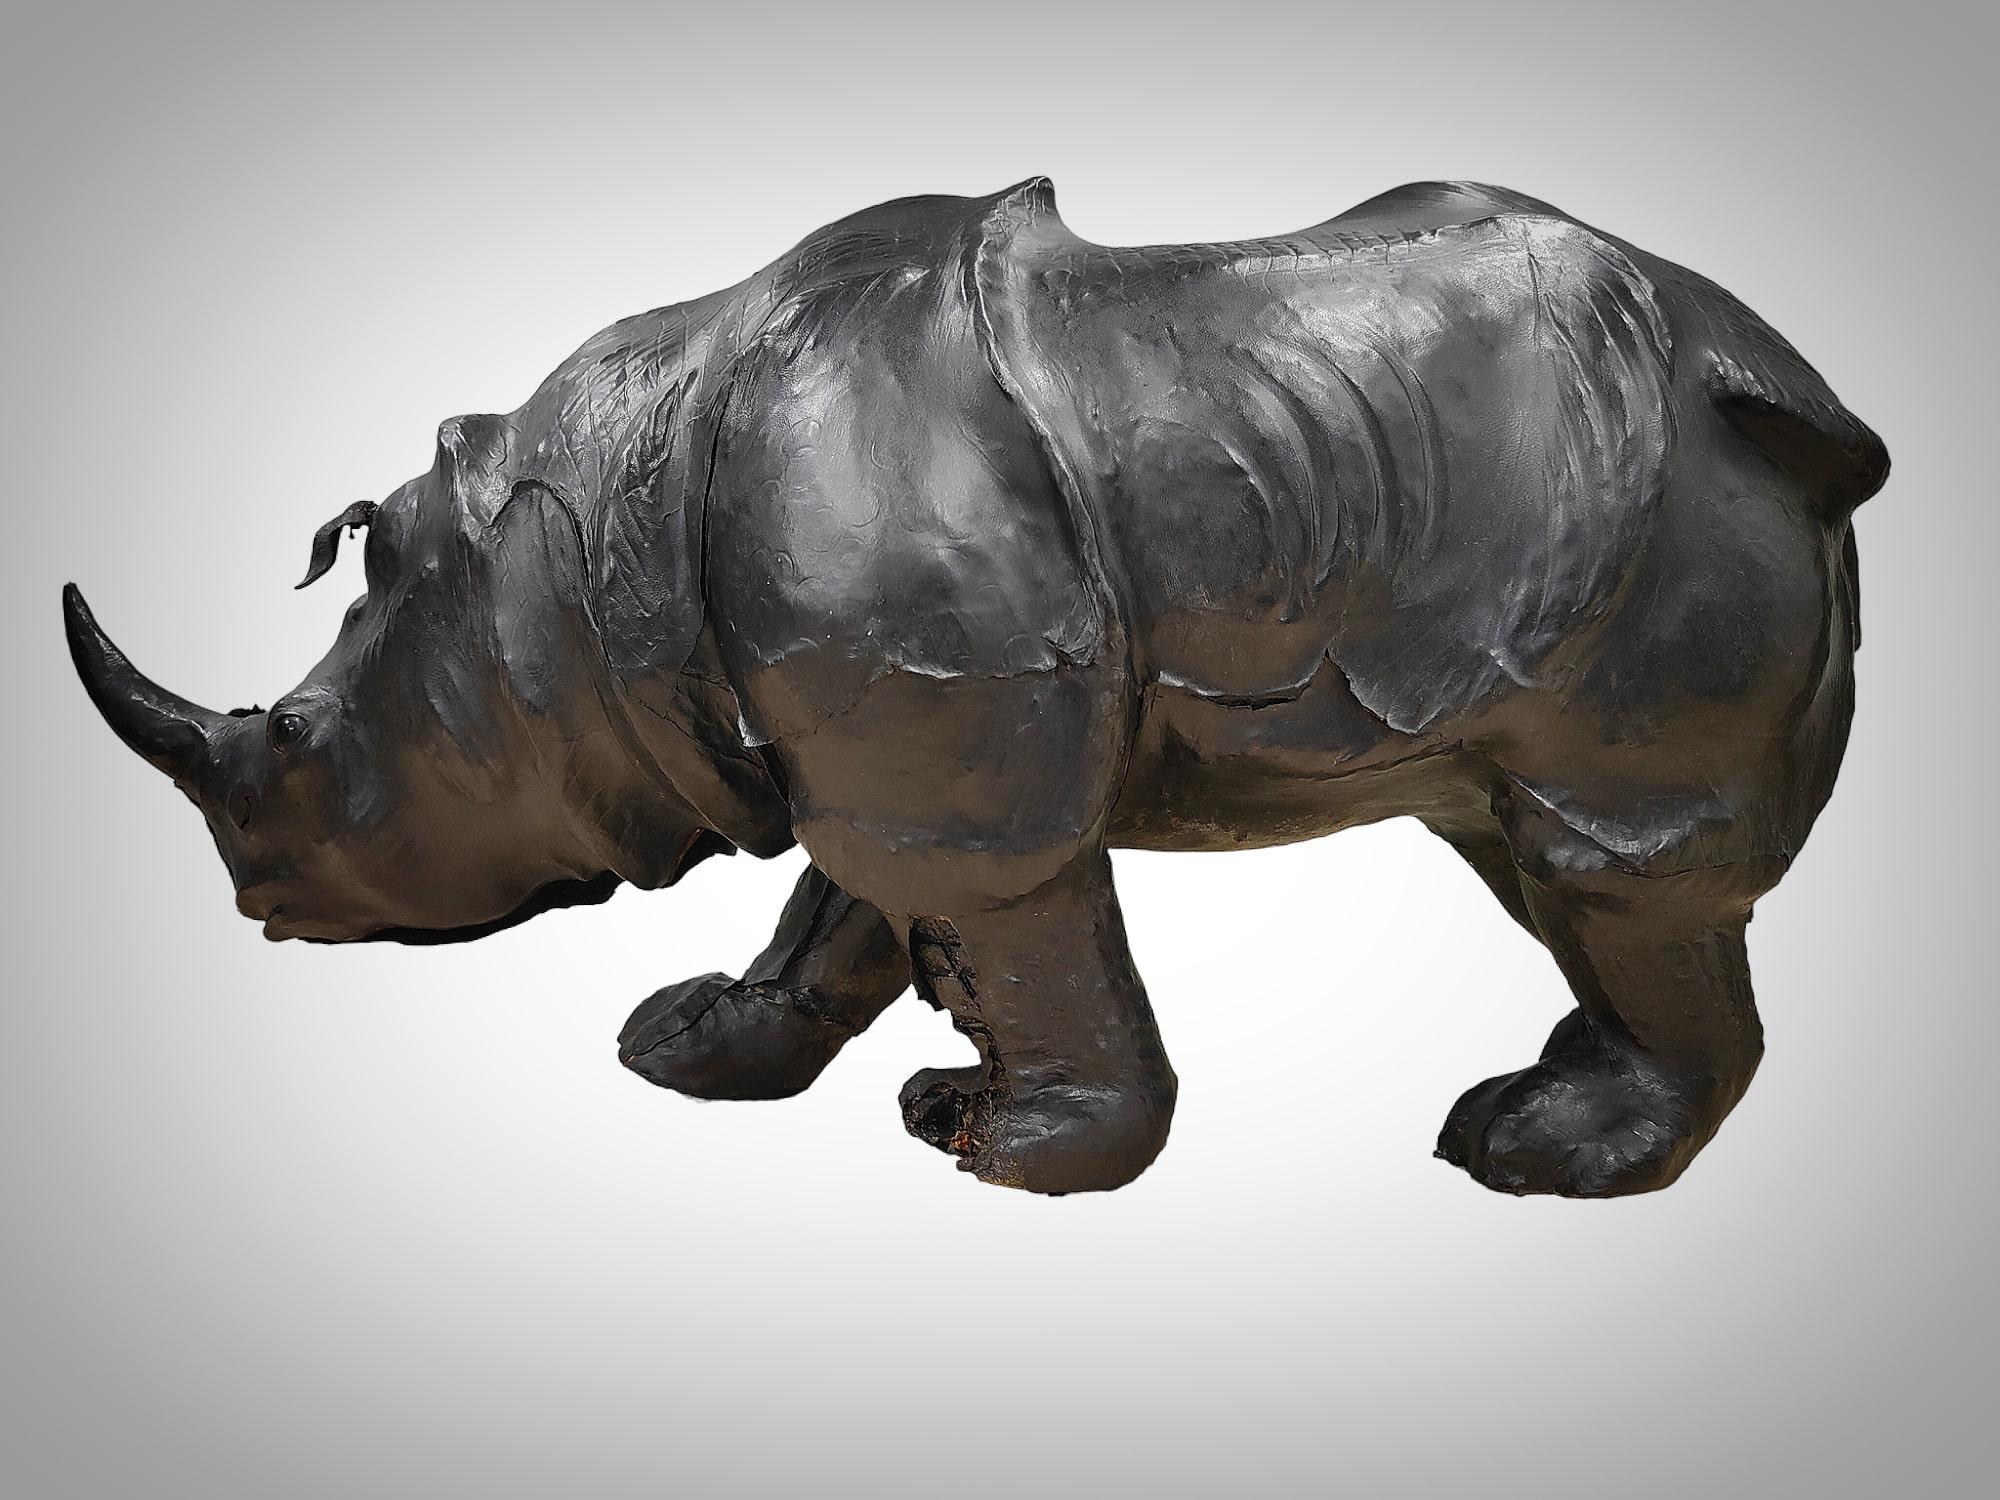 Introducing an imposing leather rhinoceros from the 1950s, a decorative piece of European origin that reflects the exceptional craftsmanship of the era. This meticulously crafted leather rhinoceros is a testament to the quality and attention to